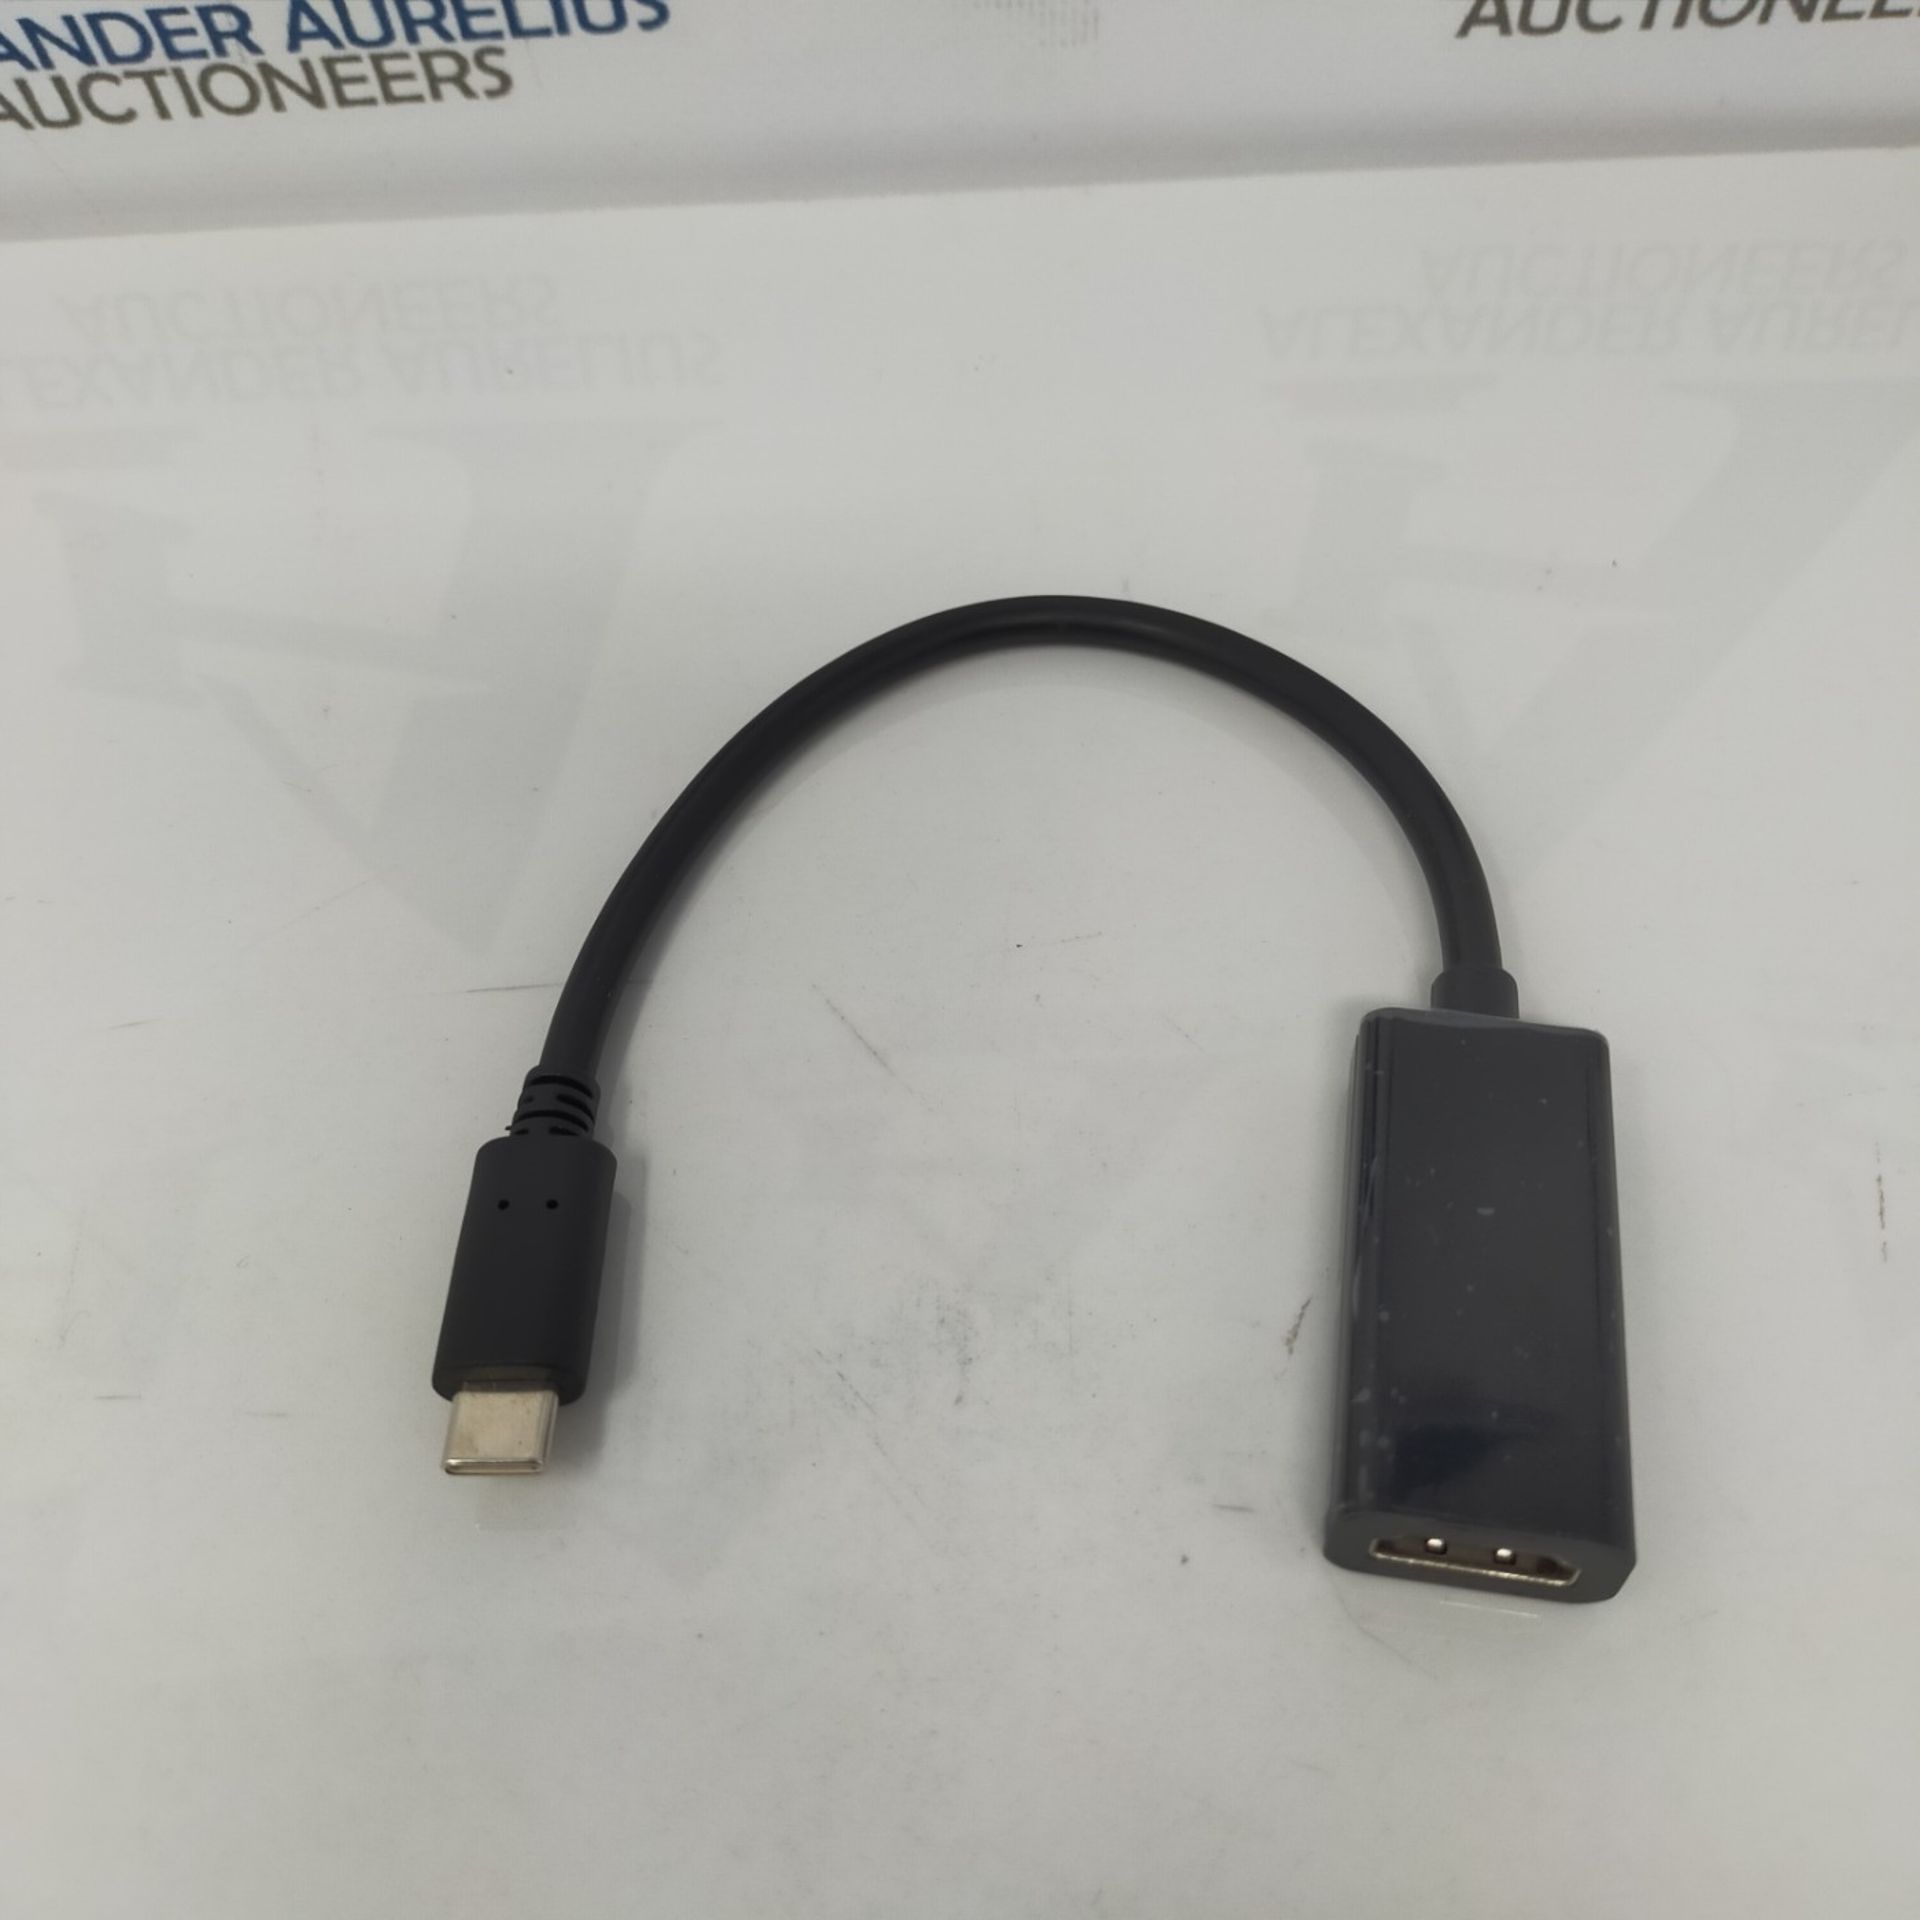 HDMI/Type C Adapter for Samsung Galaxy A70 Smartphone Converter TV Screen Rear-view Ca - Image 2 of 3